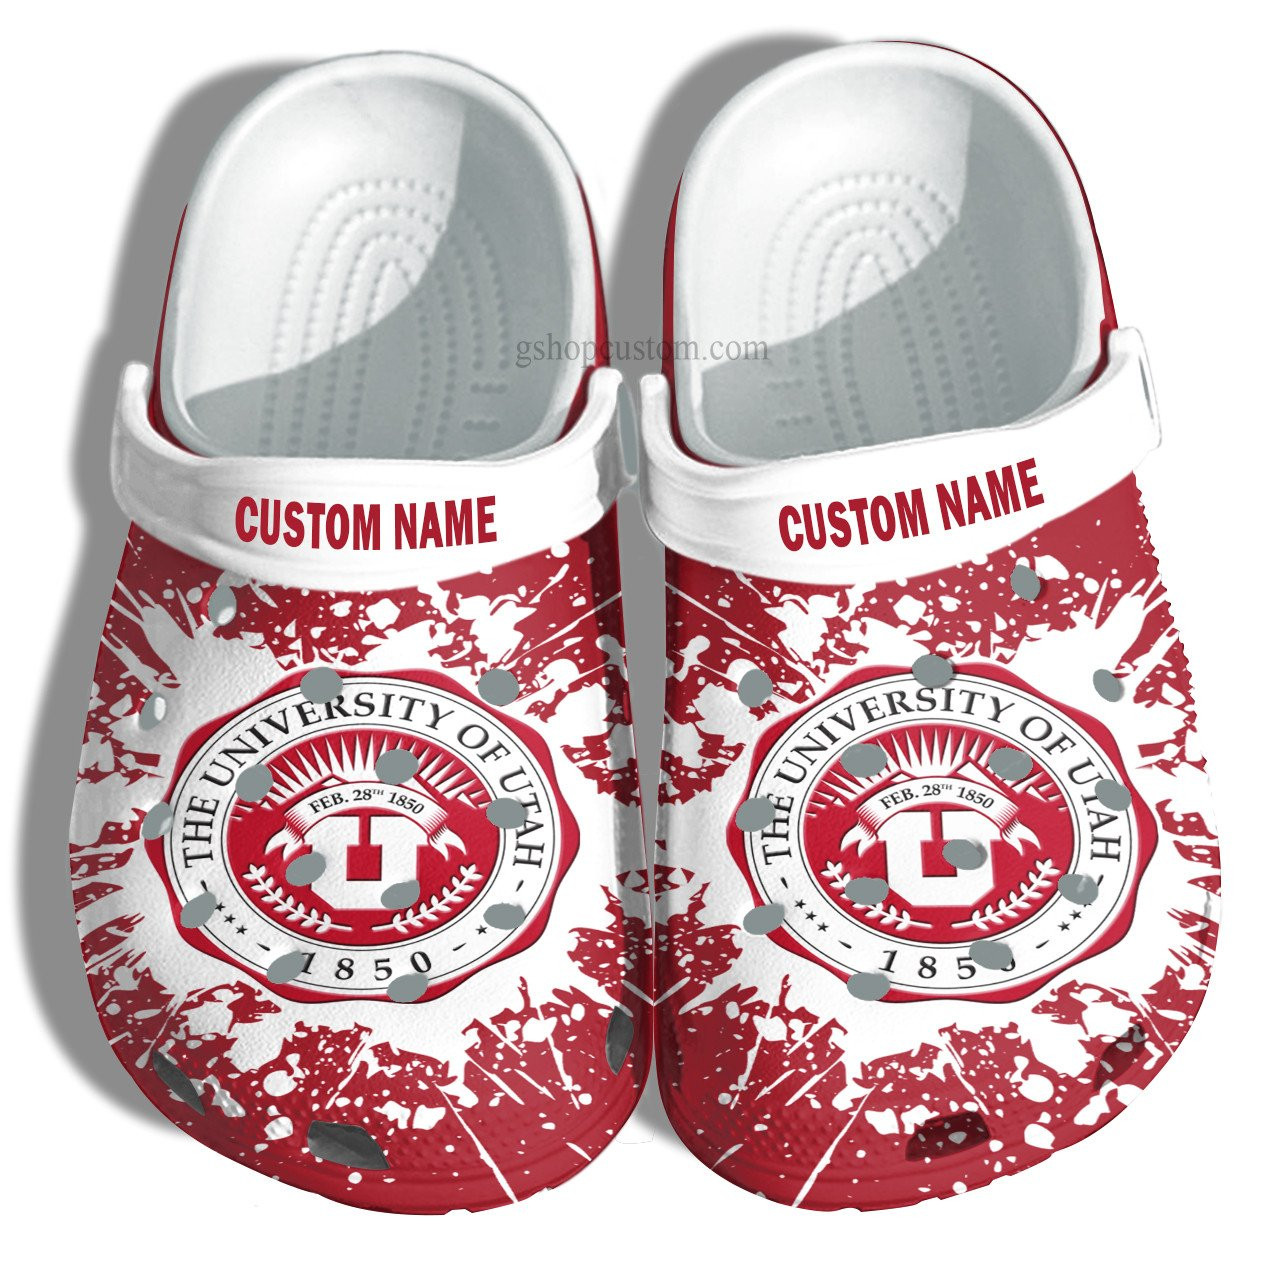 The University Of Utah Graduation Gifts Croc Shoes Customize- Admission Gift Crocs Shoes